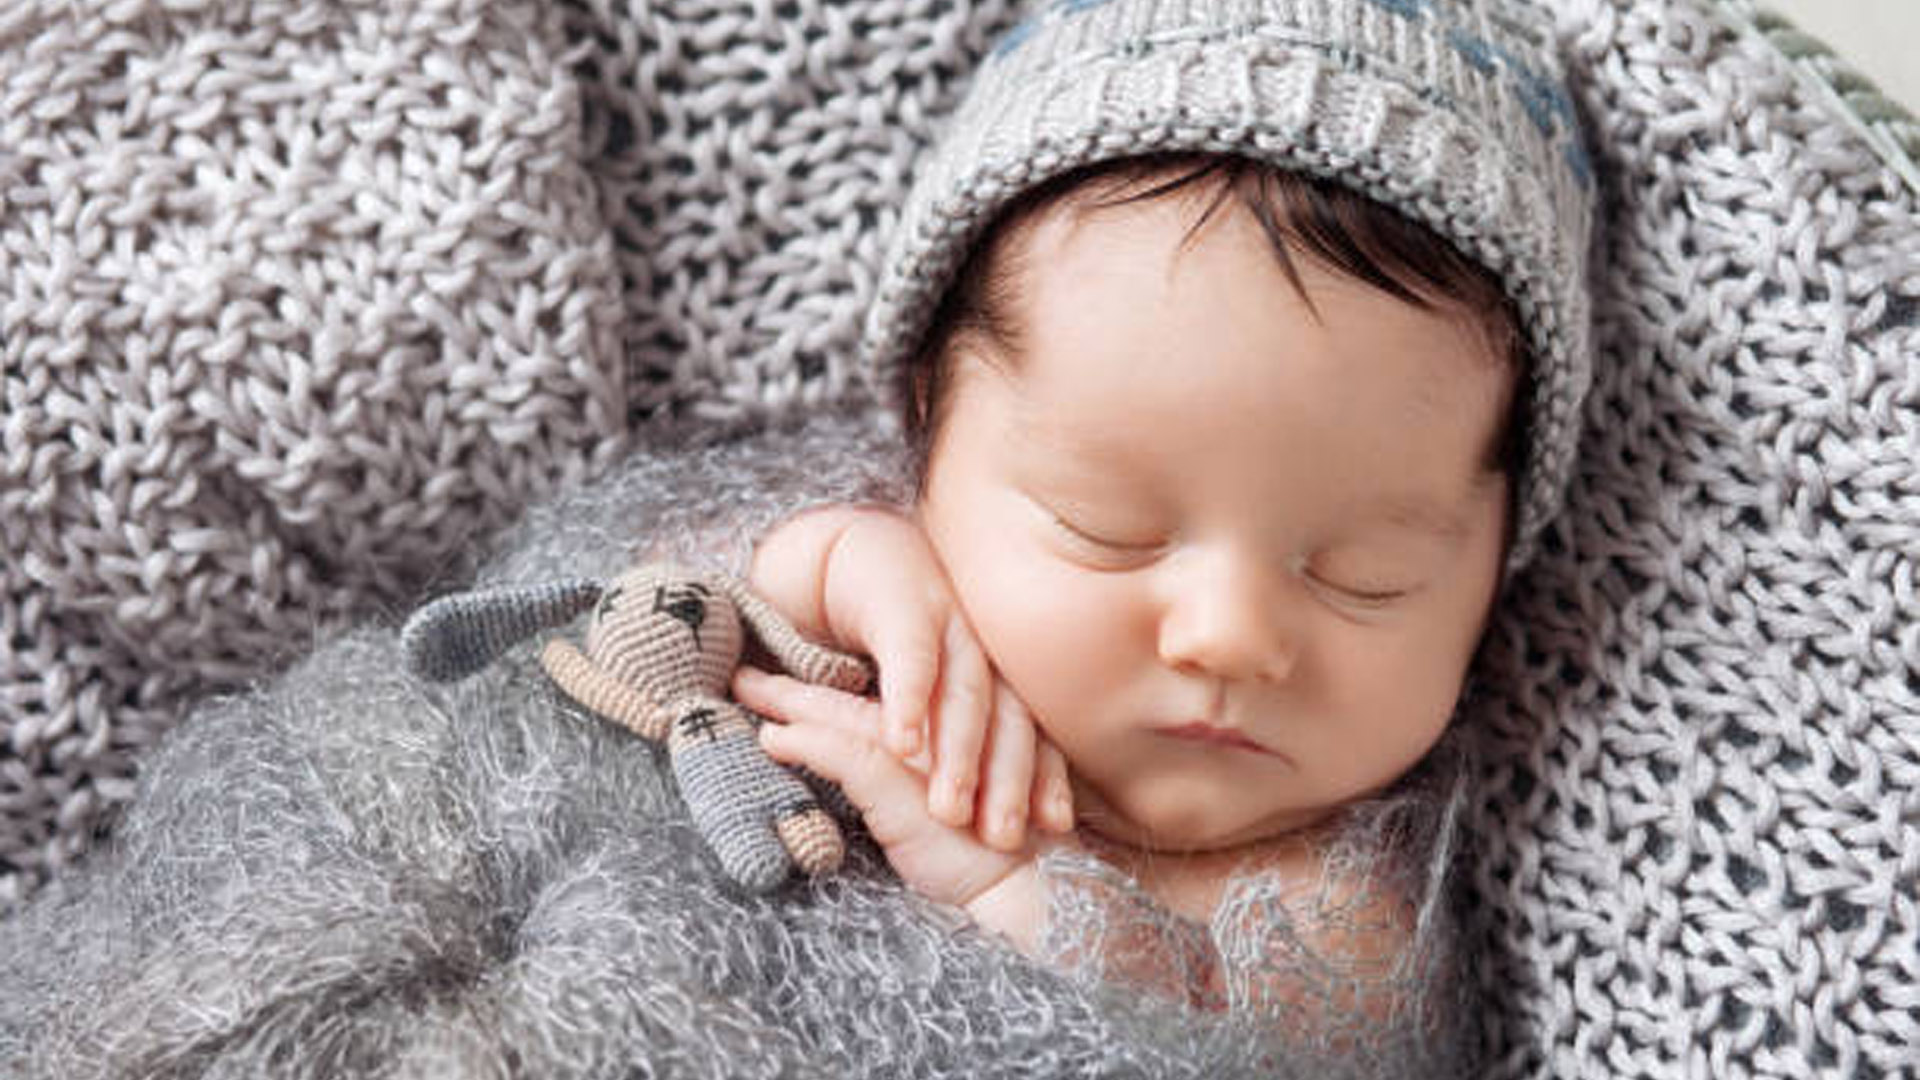 Baby Is Sleeping With Toy Wearing Woolen Knitted Cap HD